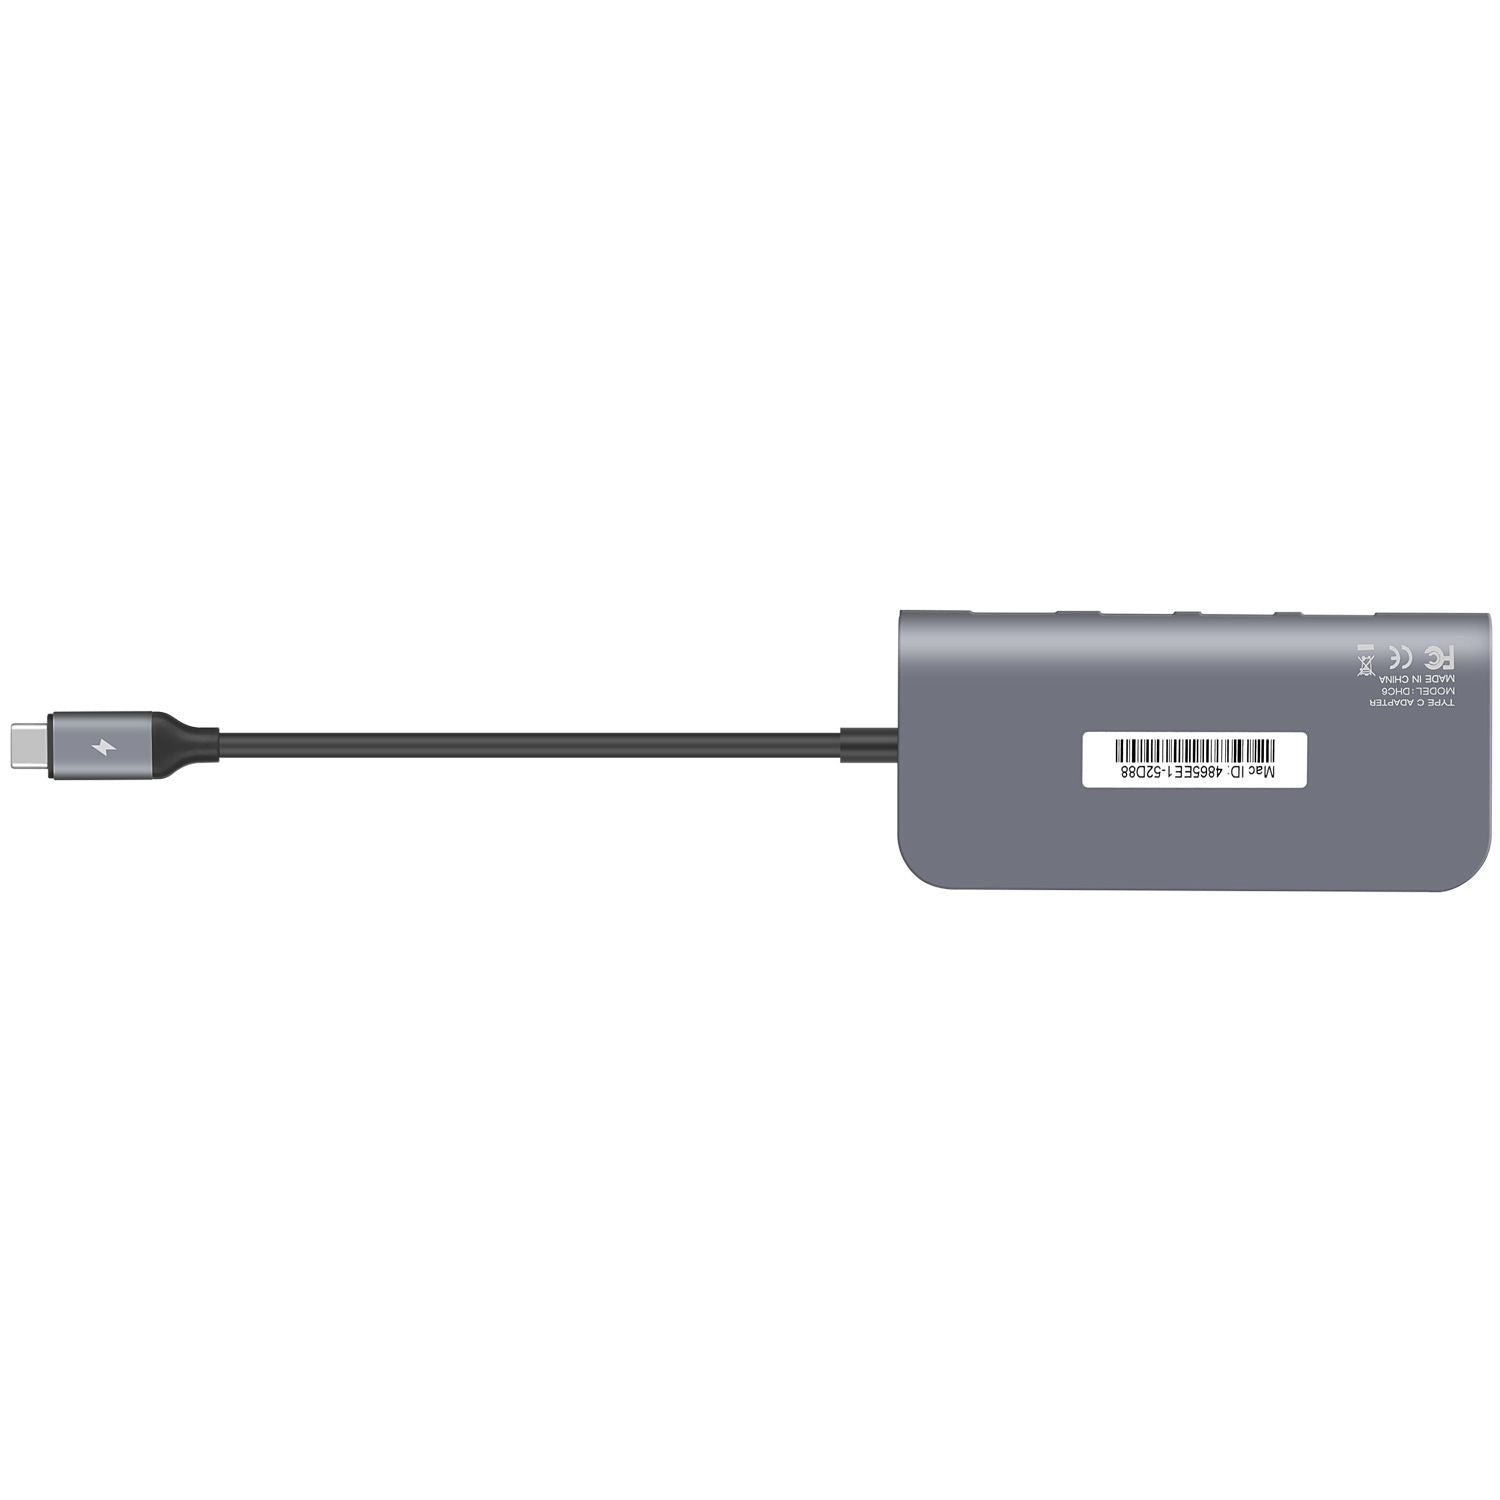 Momax One Link 8 in 1 Hub Dual - Gray